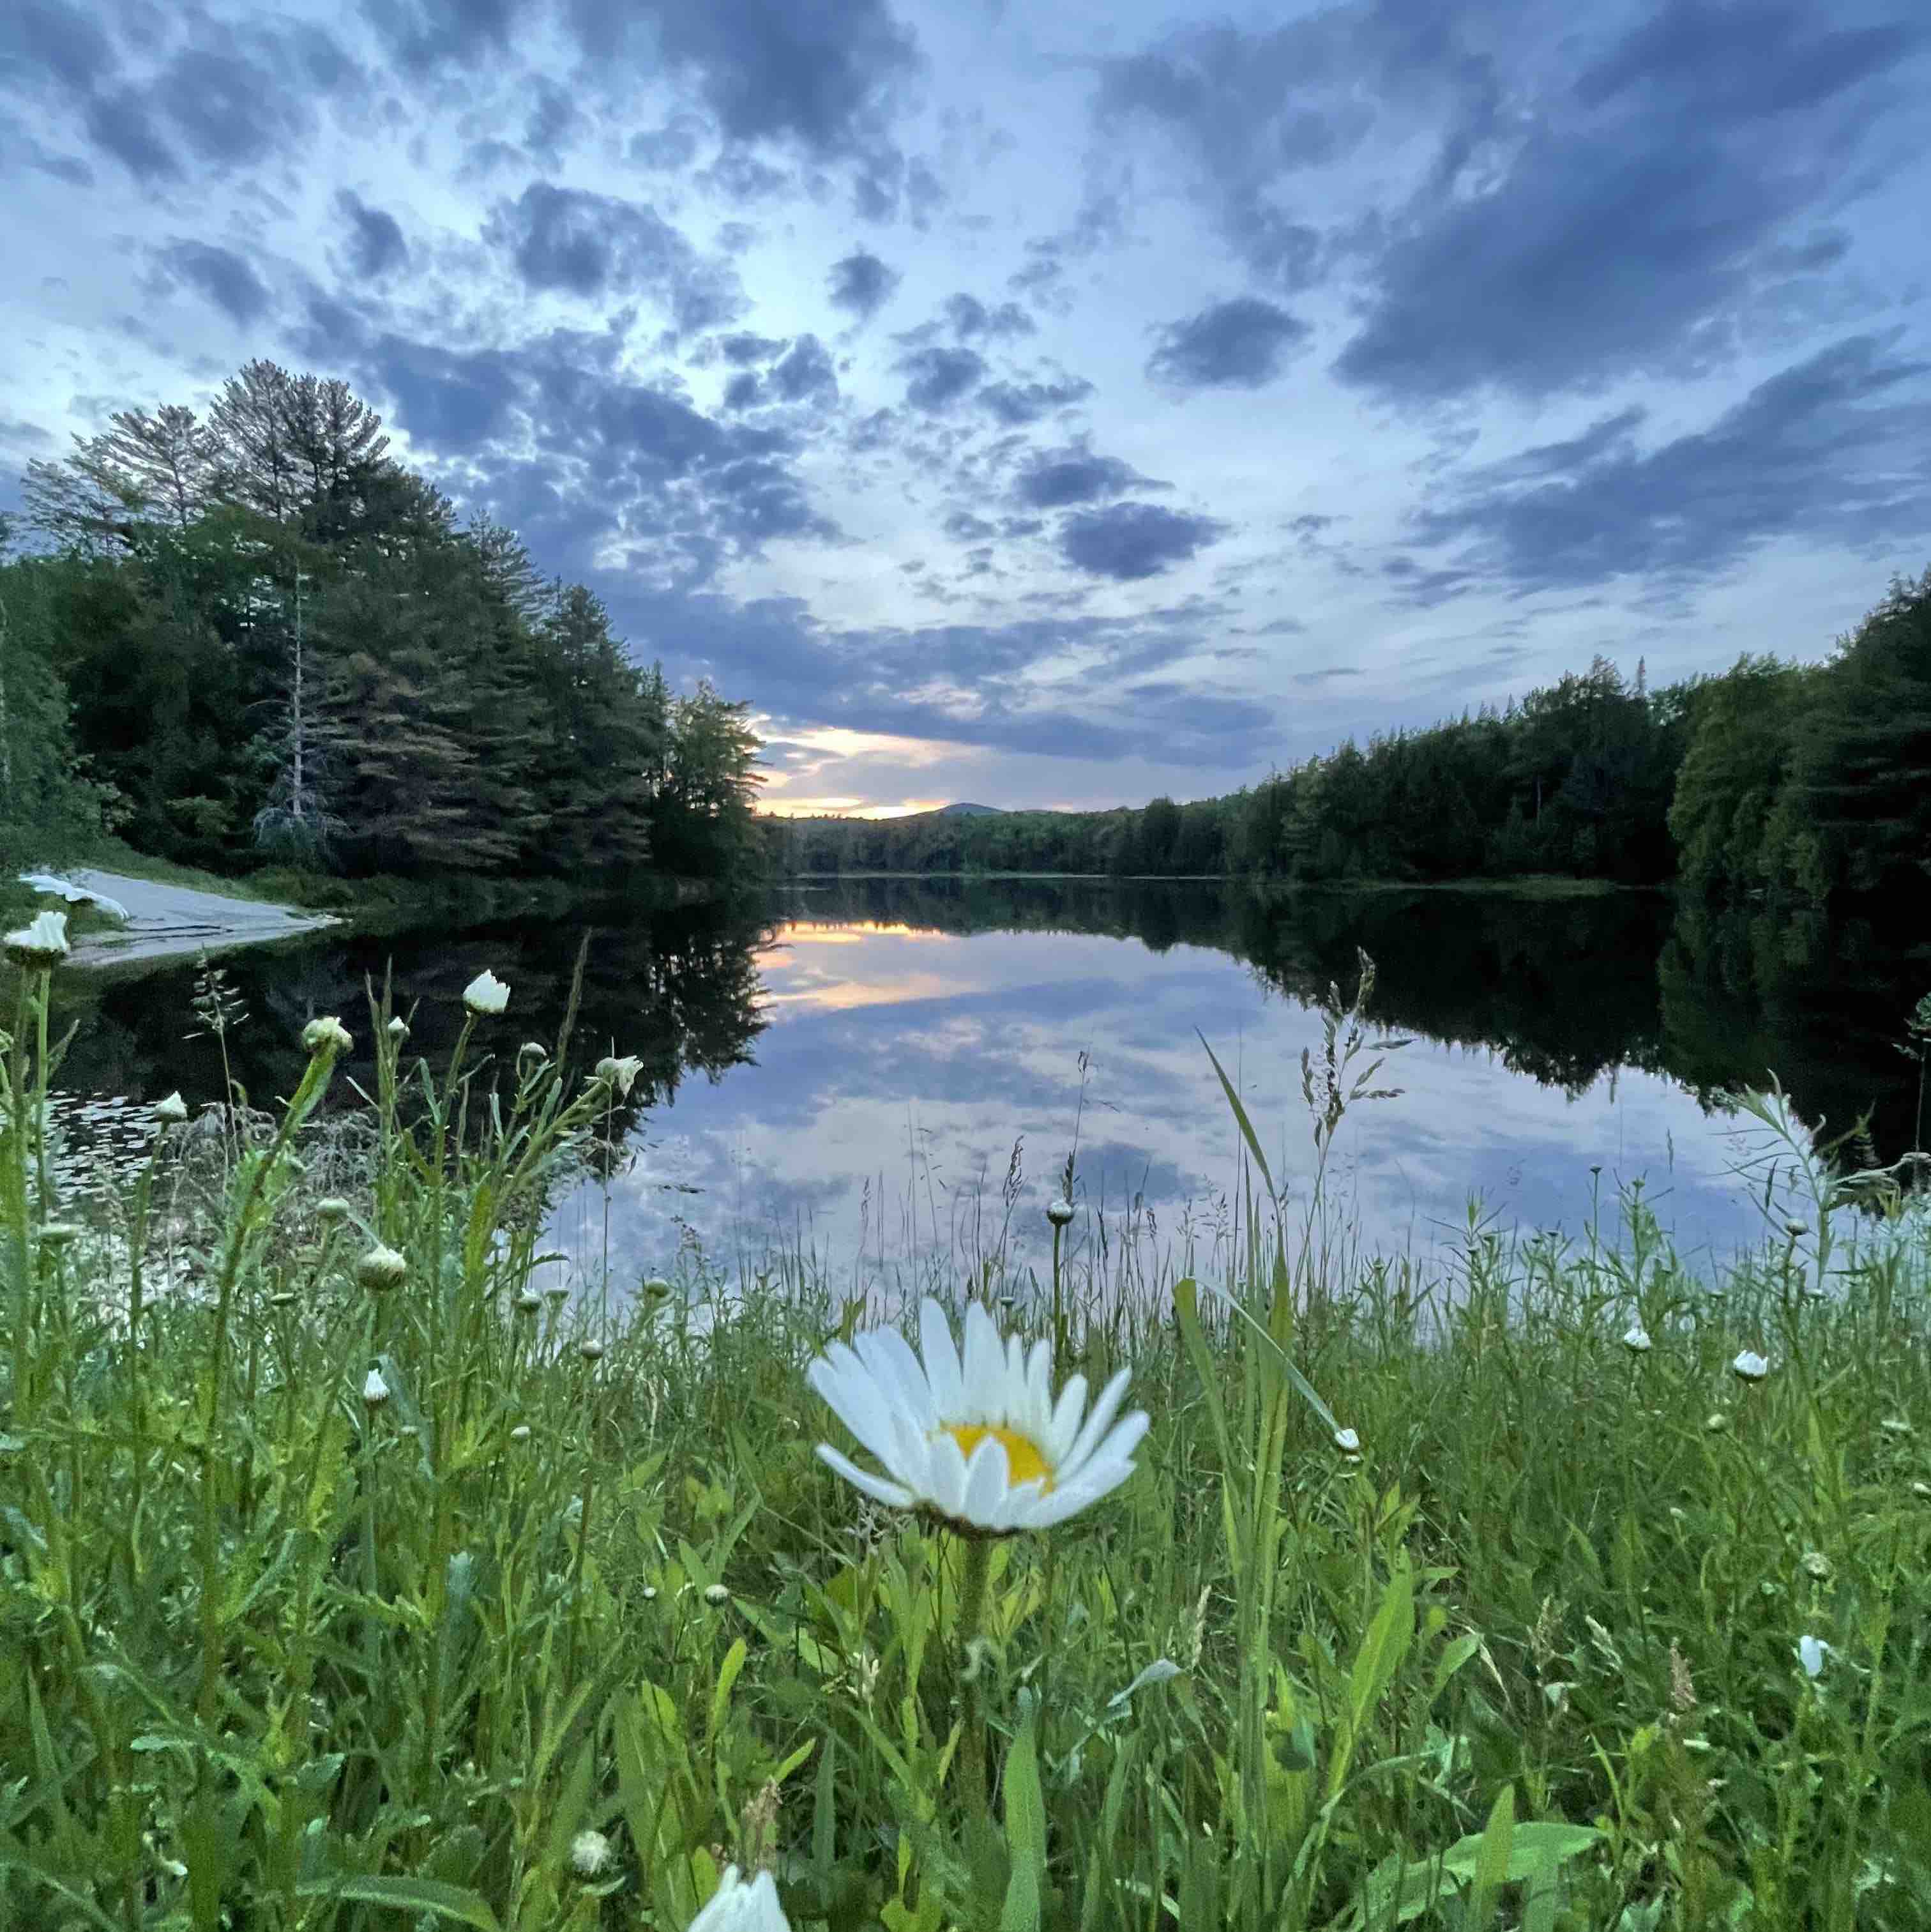 Image of a sunset at Gale Meadows Pond in Vermont